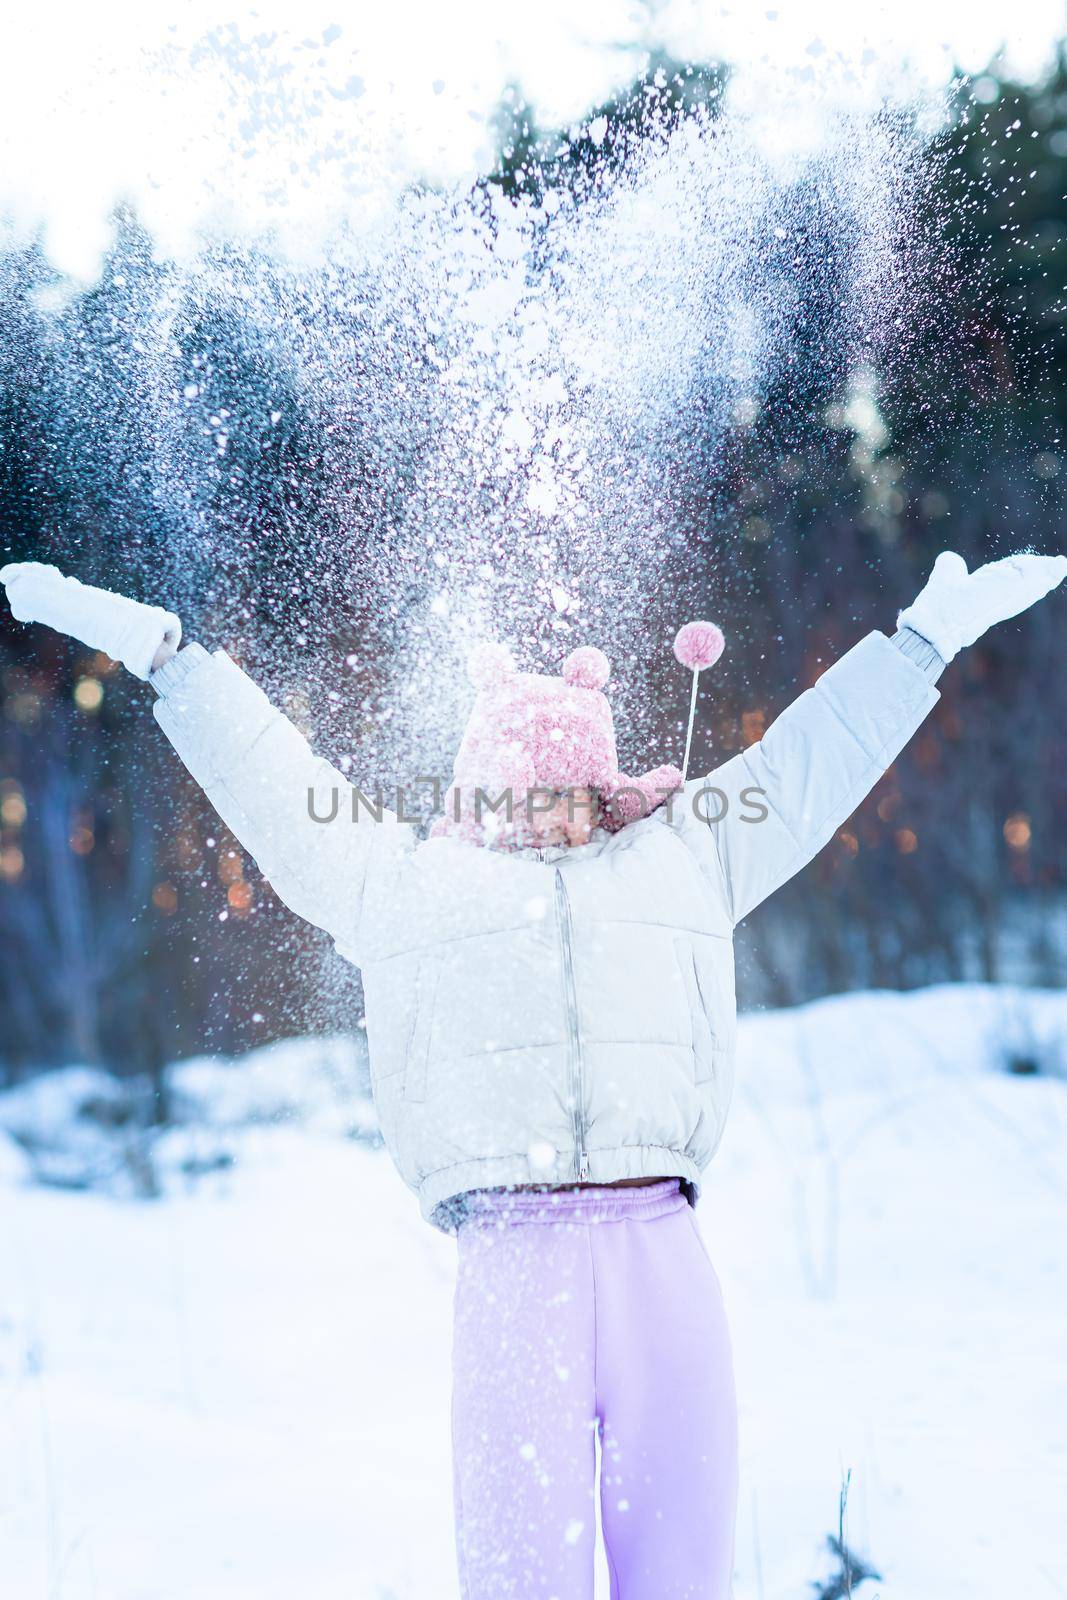 Cute little teenage girl having fun playing with snowballs, ready to throw the snowball. Snow games. Winter vacation.